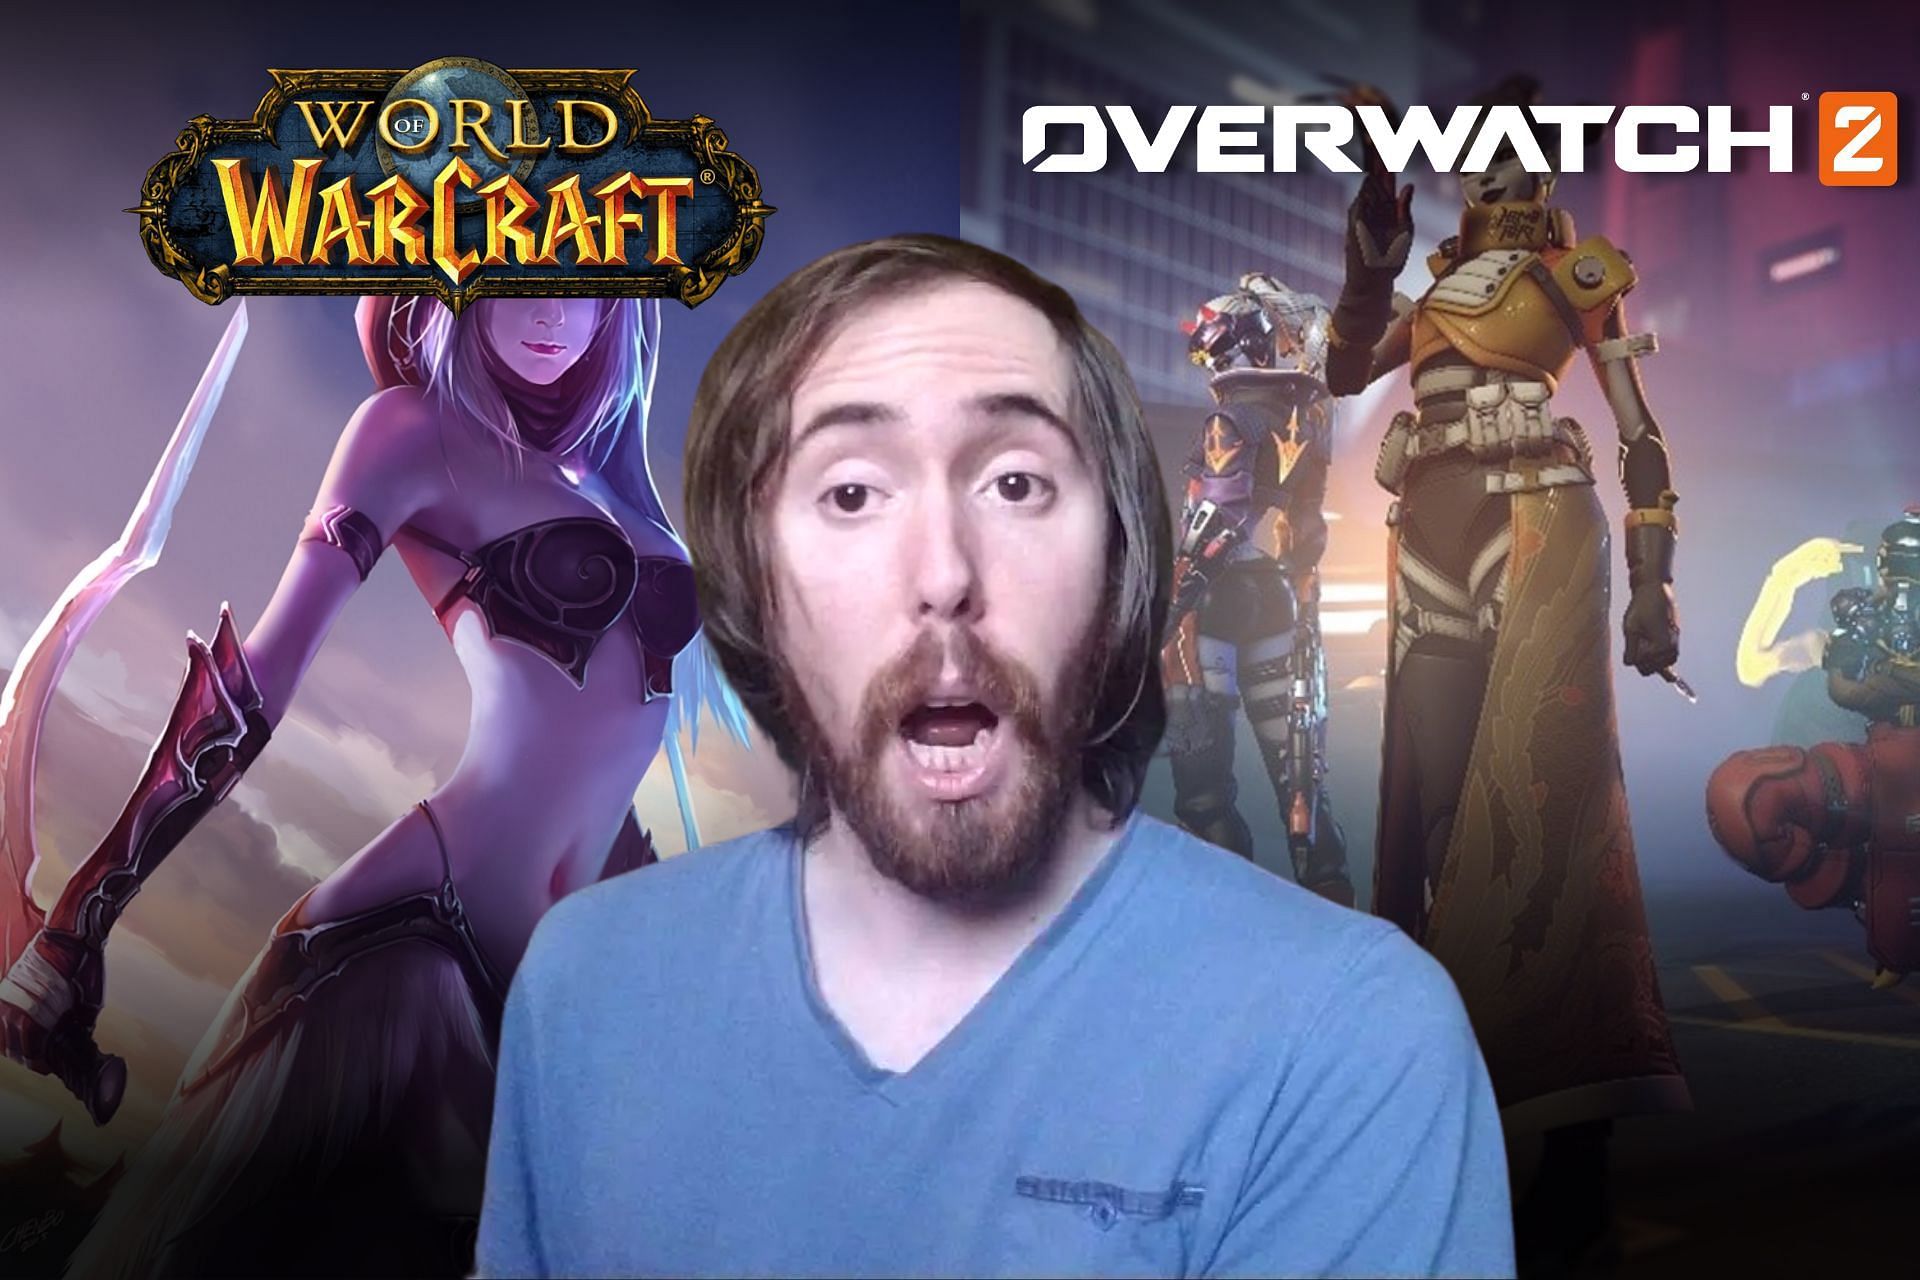 Asmongold left stunned after hearing that Overwatch 2